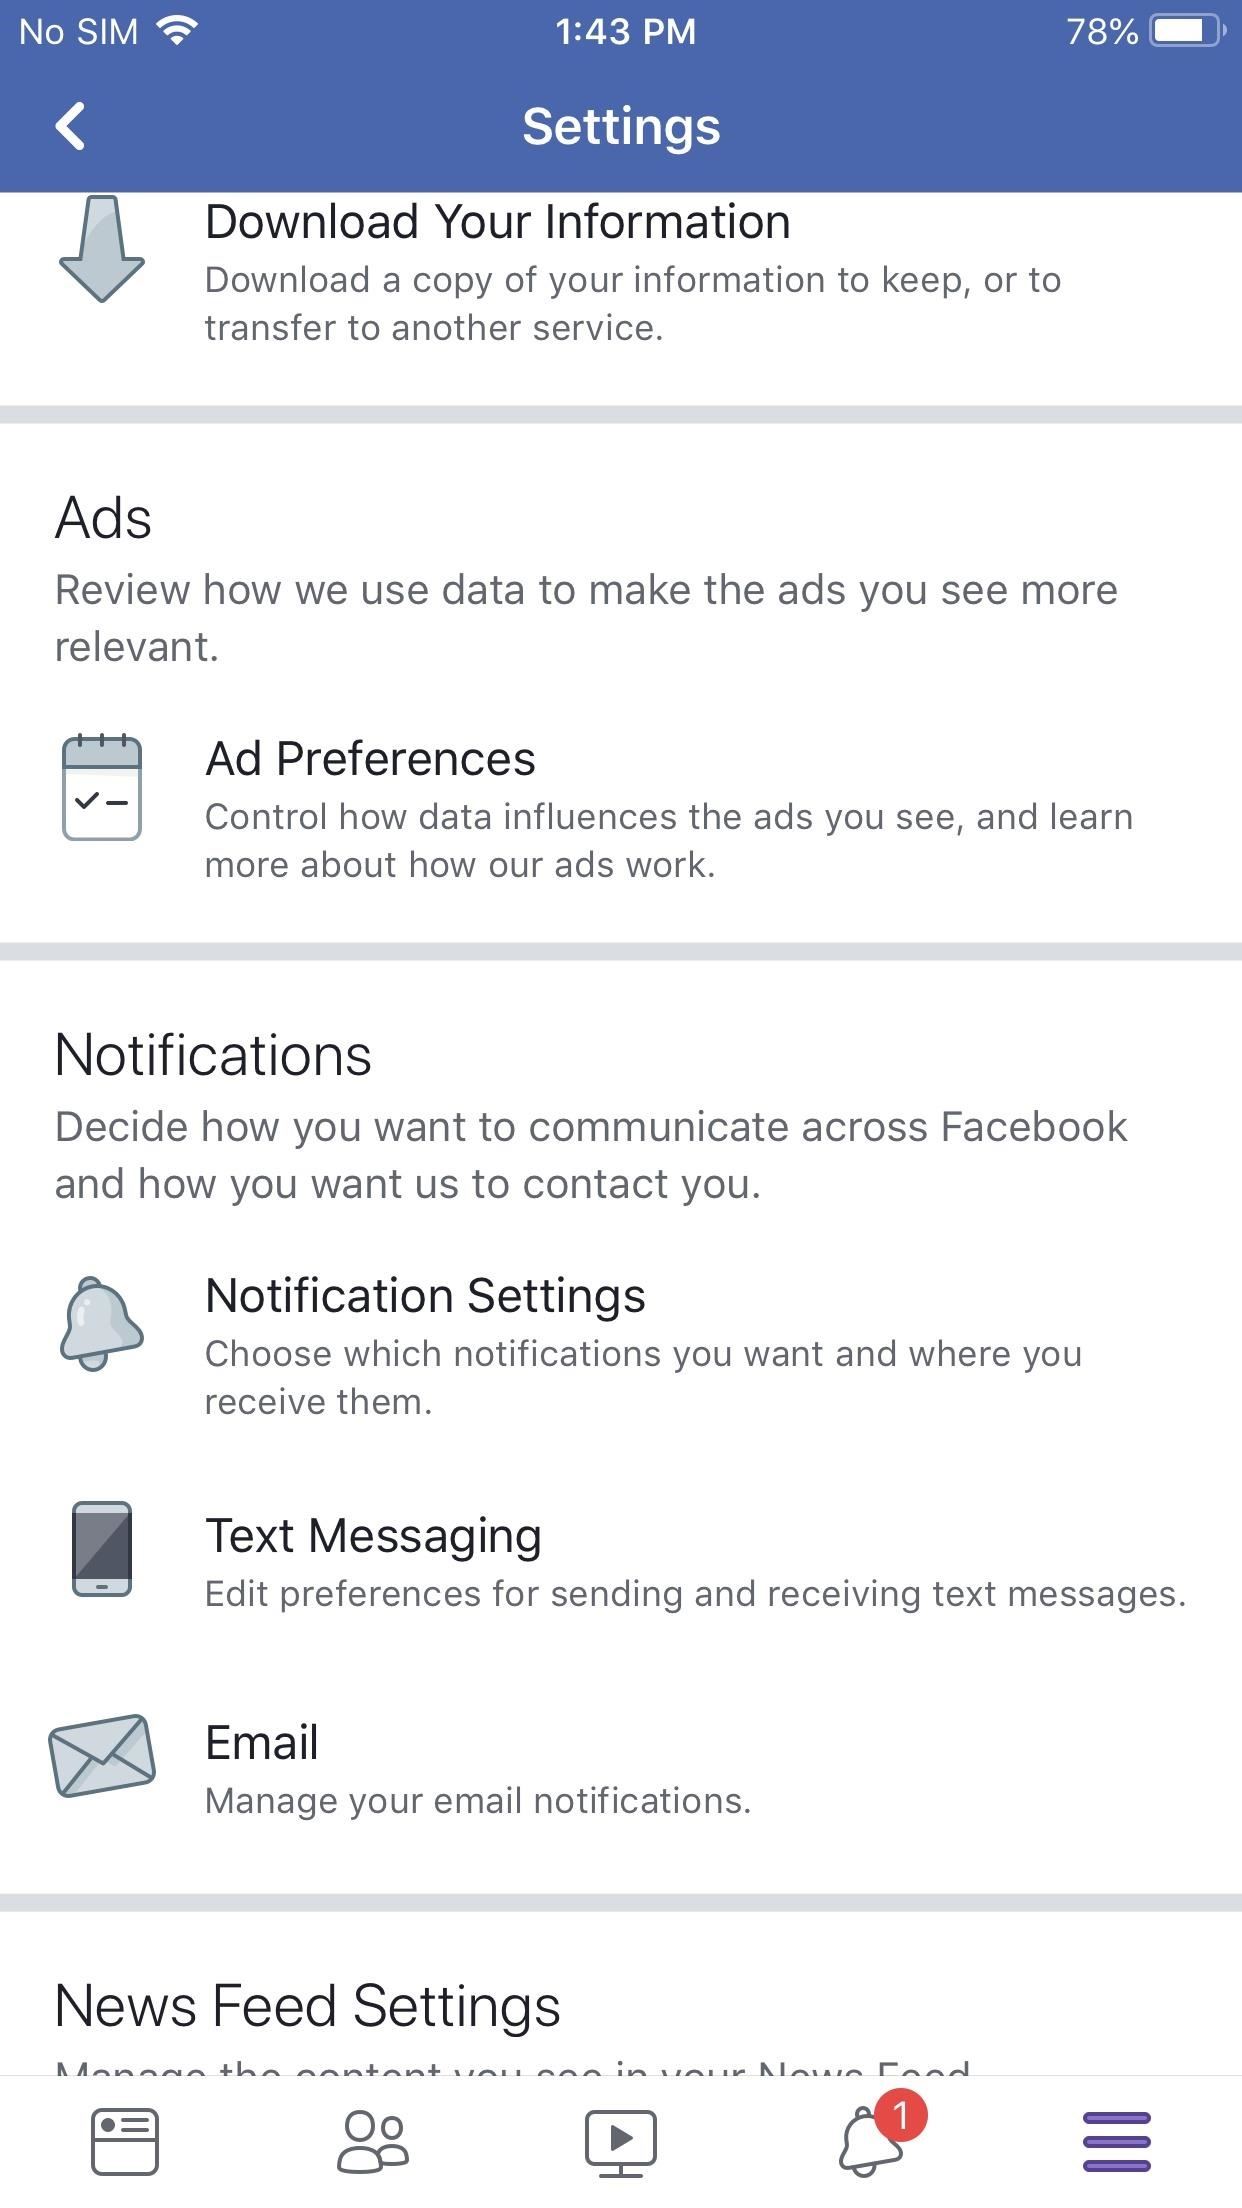 How to Stop Facebook's Annoying Marketplace Notifications